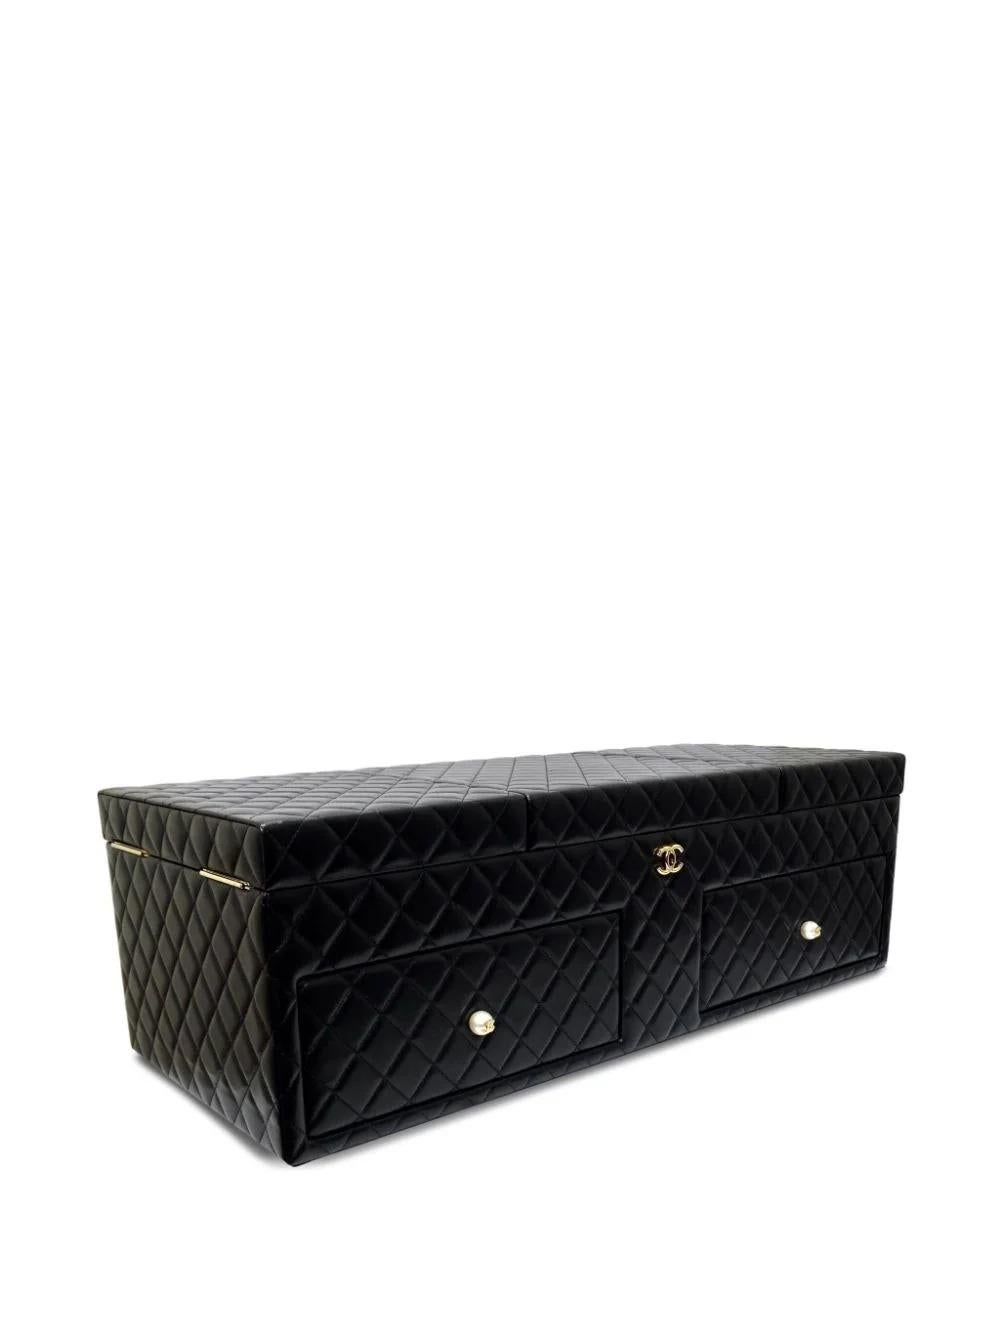 Chanel 2010 Diamond Quilted Lambskin Giant Jewelry Decor Case In Good Condition For Sale In Miami, FL